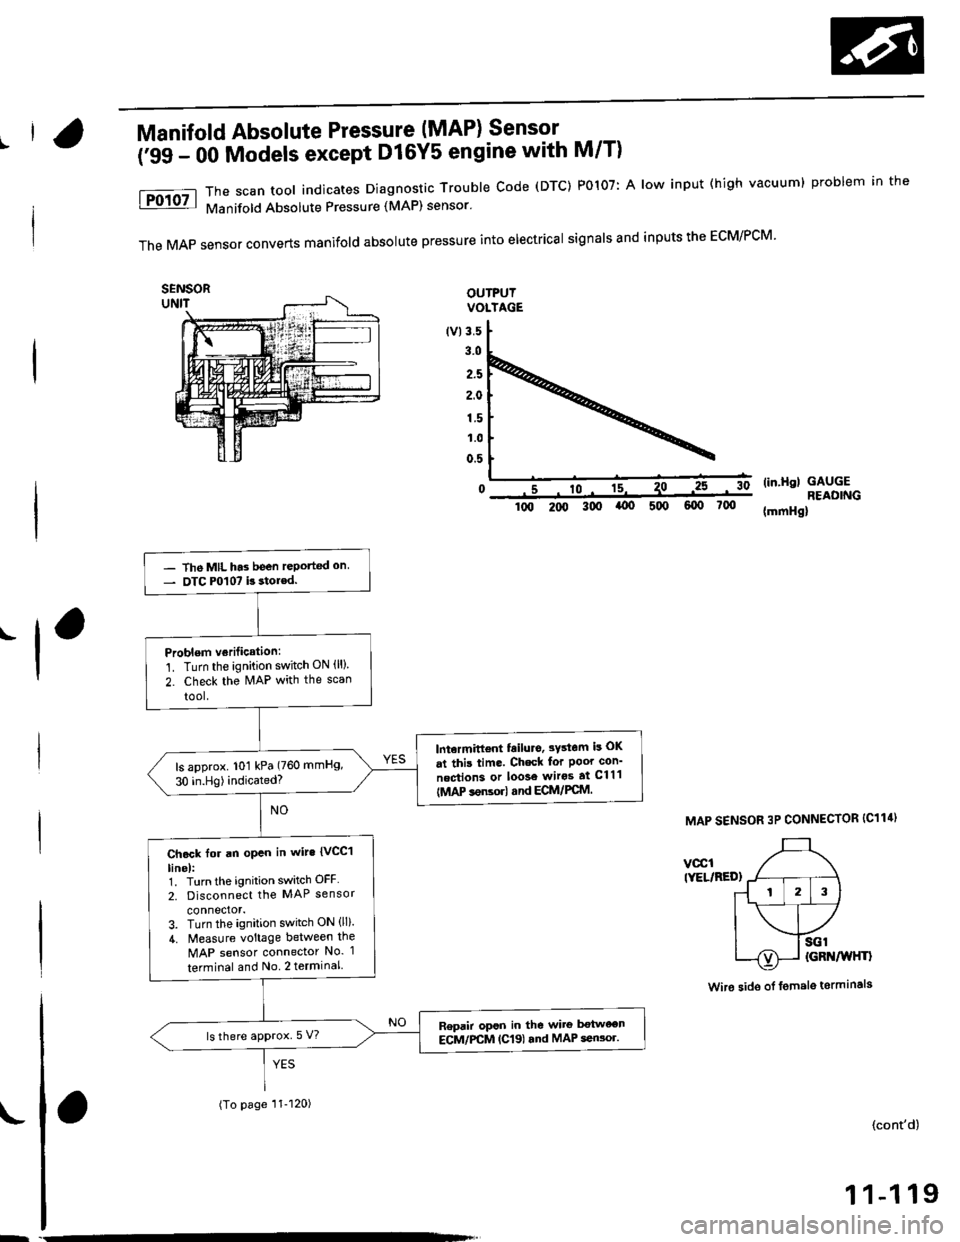 HONDA CIVIC 1997 6.G Owners Manual |Manifold Absolute Pressure (MAP) Sensor
(;gg - OO Models except Dl6Y5 engine with M/T)
The scan tool indicates Diagnostrc Trouble Code (DTC) PO1O7: A low input (high vacuuml problem in the
Manifold 